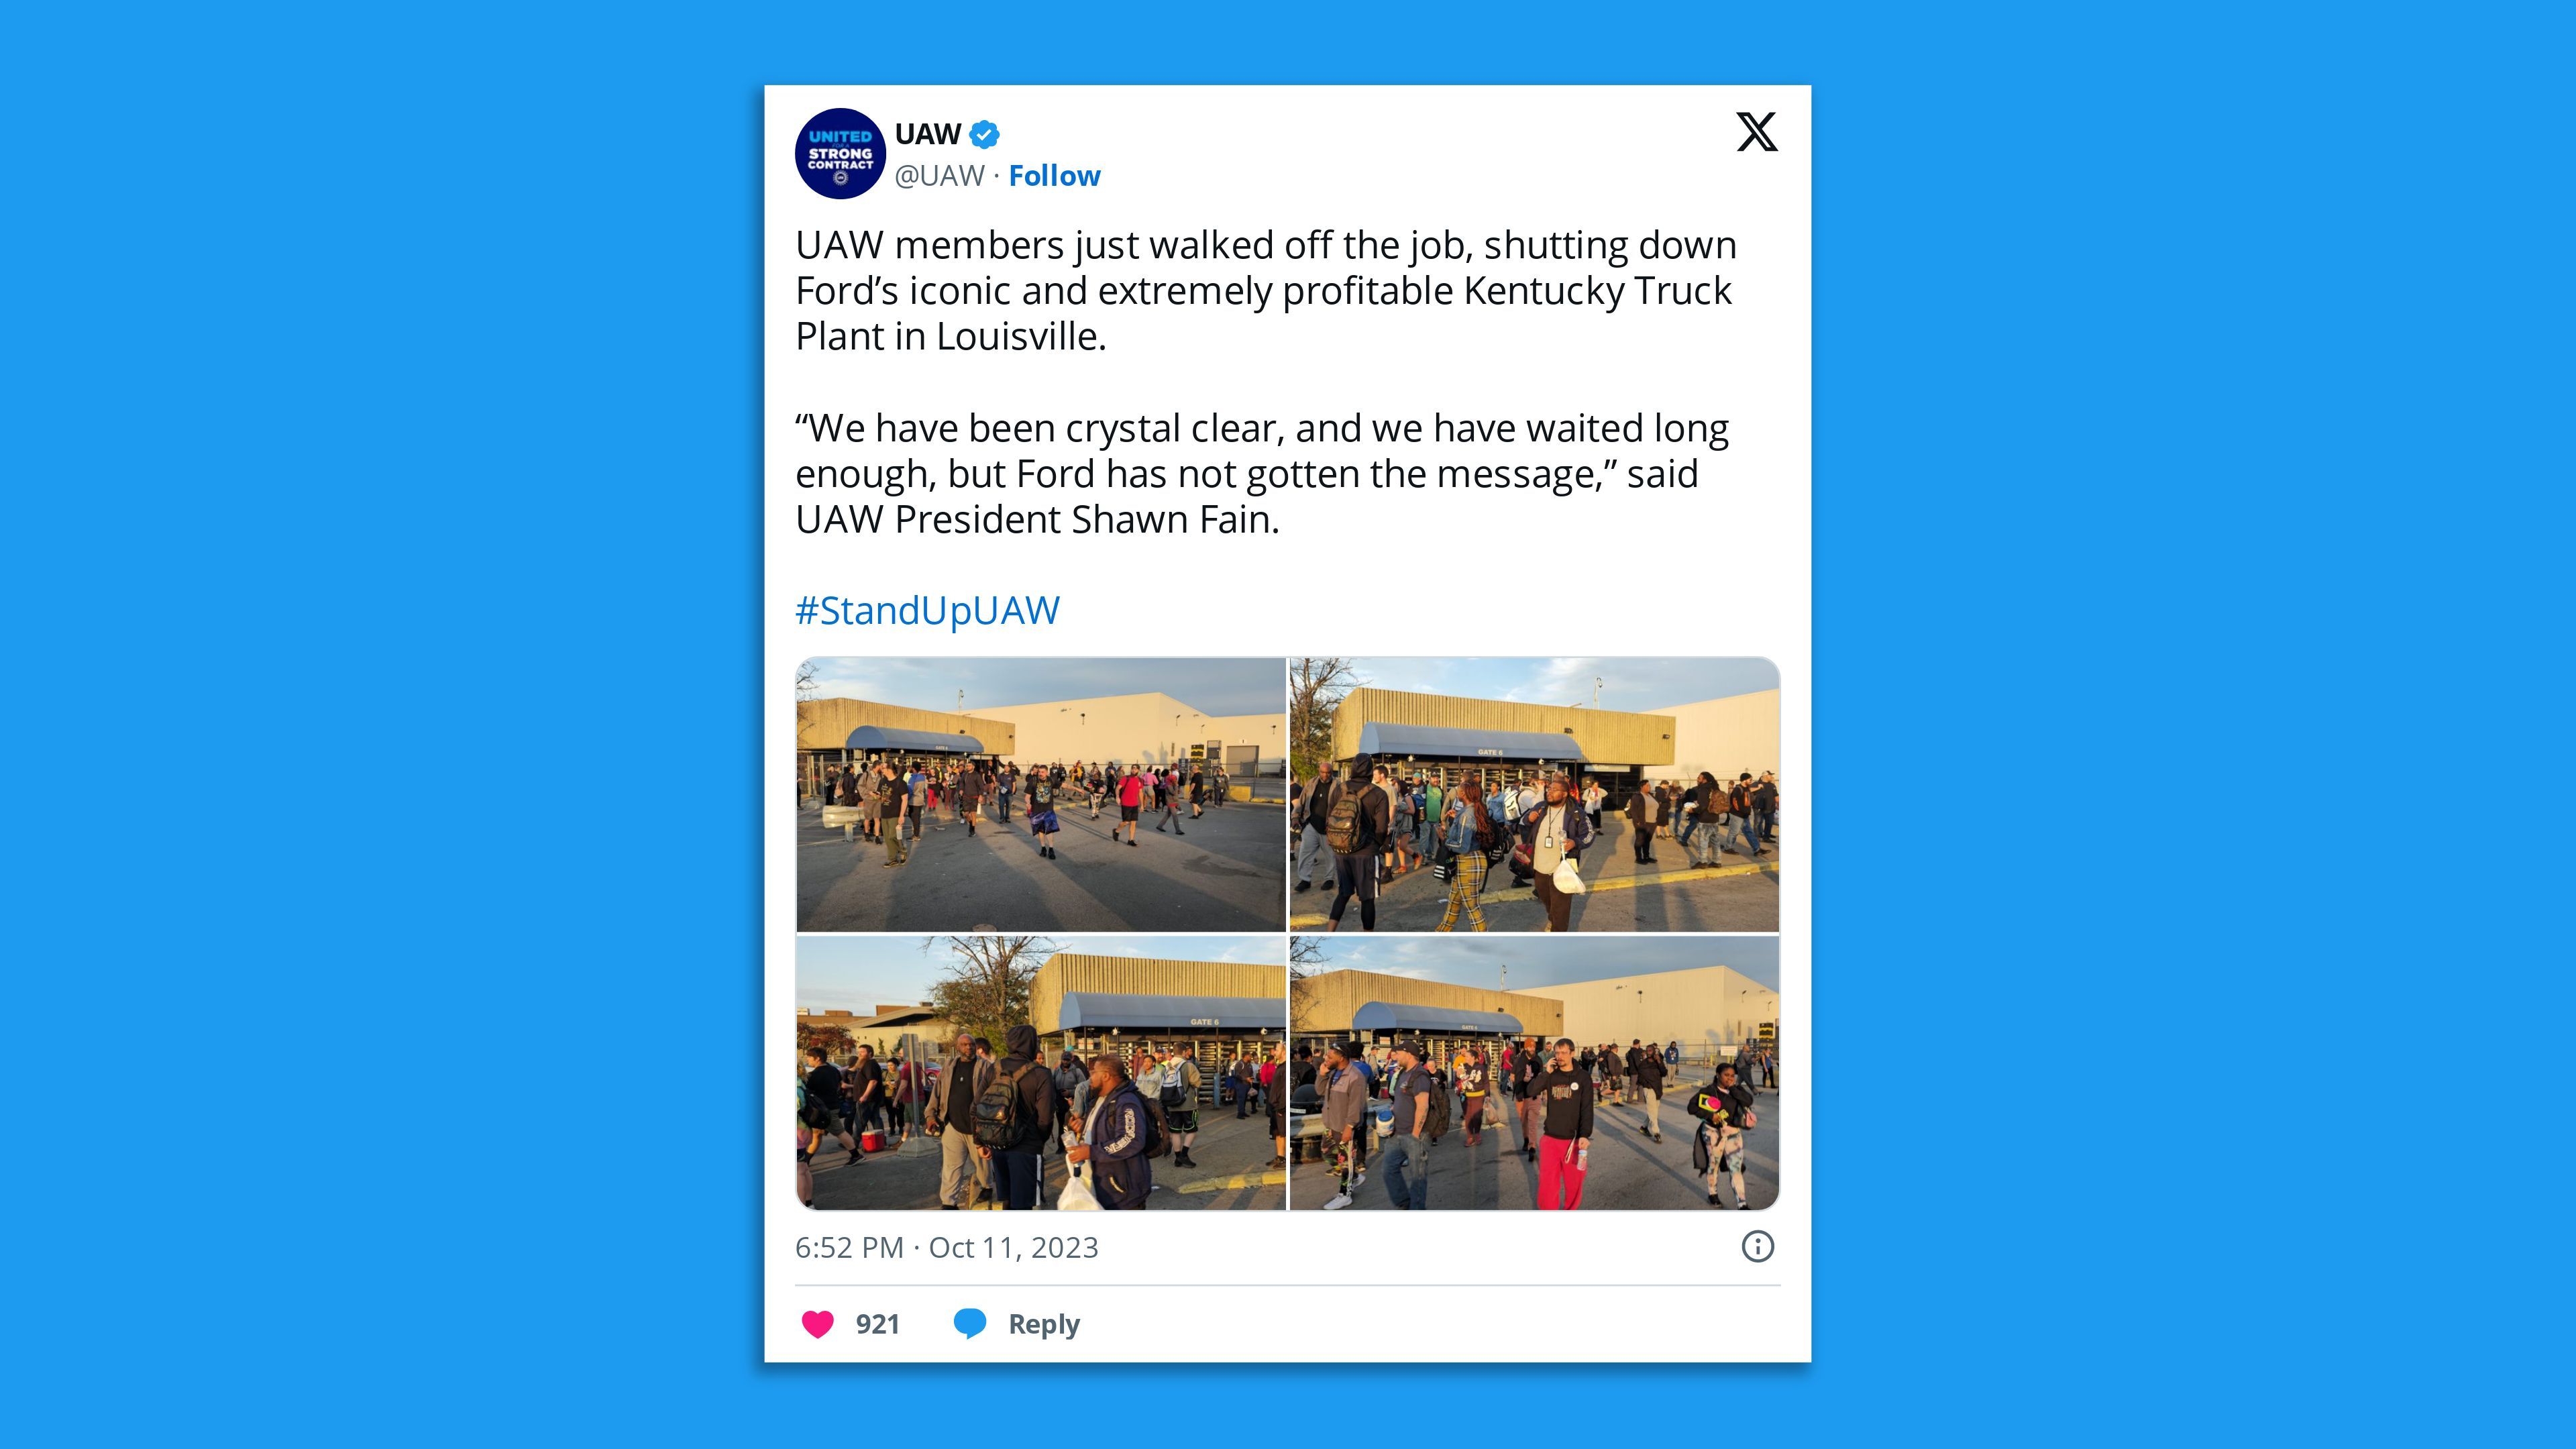 A screenshot of a United Auto Workers union tweet, saying: "UAW members just walked off the job, shutting down Ford’s iconic and extremely profitable Kentucky Truck Plant in Louisville.  “We have been crystal clear, and we have waited long enough, but Ford has not gotten the message,” said UAW President Shawn Fain.  #StandUpUAW"